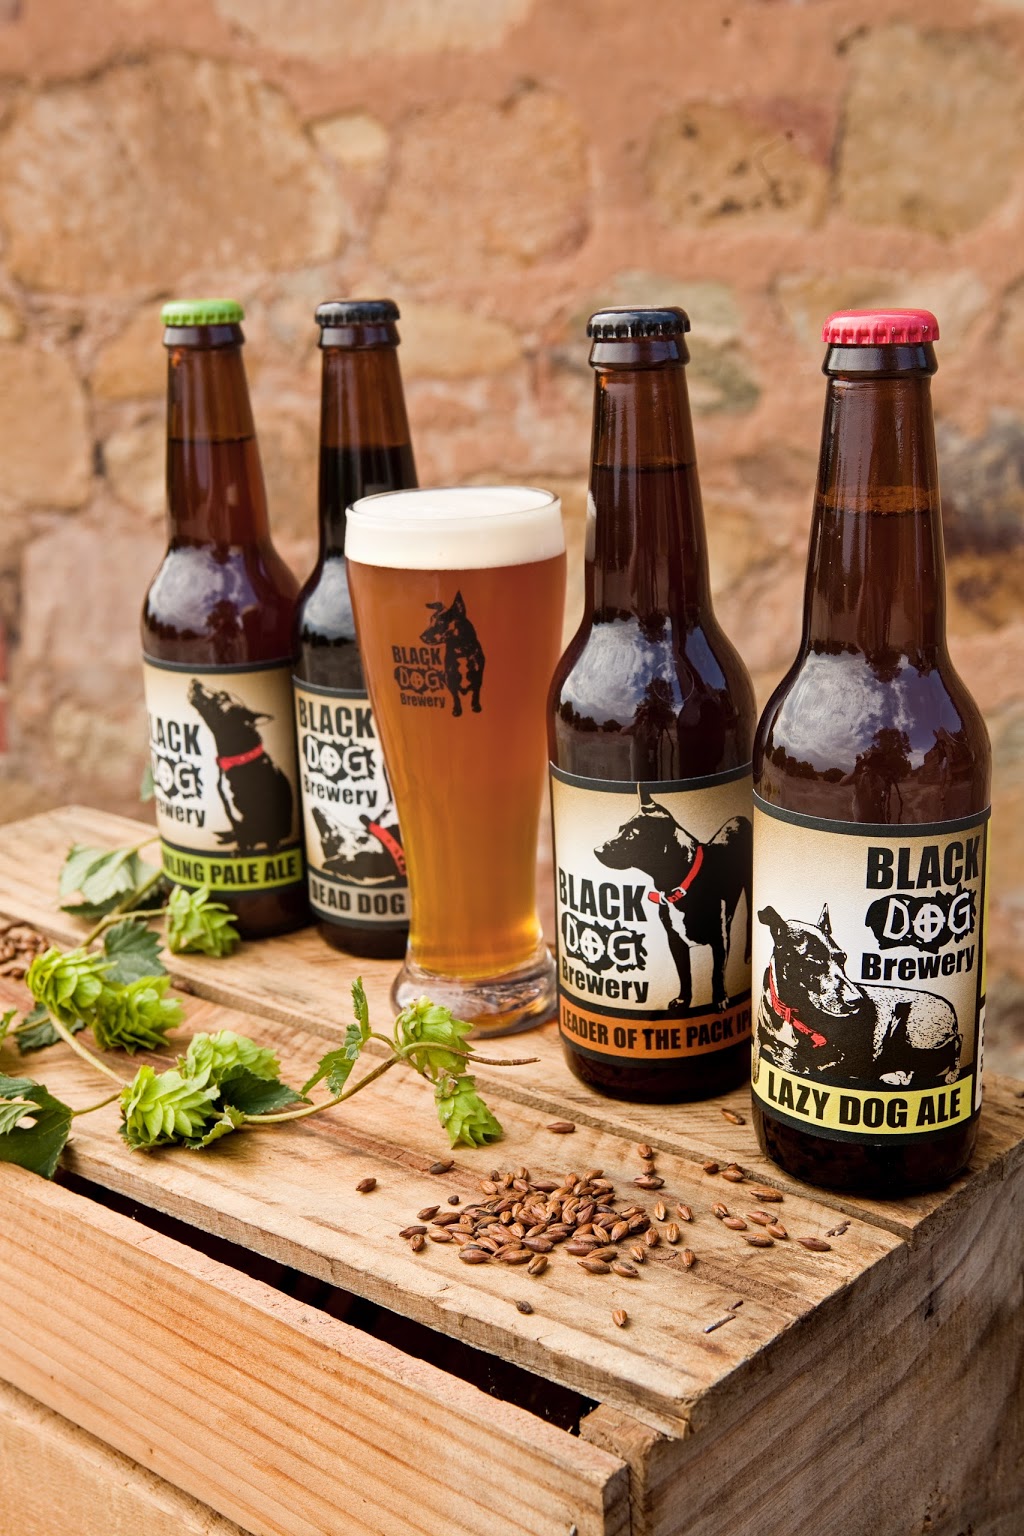 Black Dog Brewery | food | 339 Booth Rd, Taminick VIC 3675, Australia | 0408577916 OR +61 408 577 916